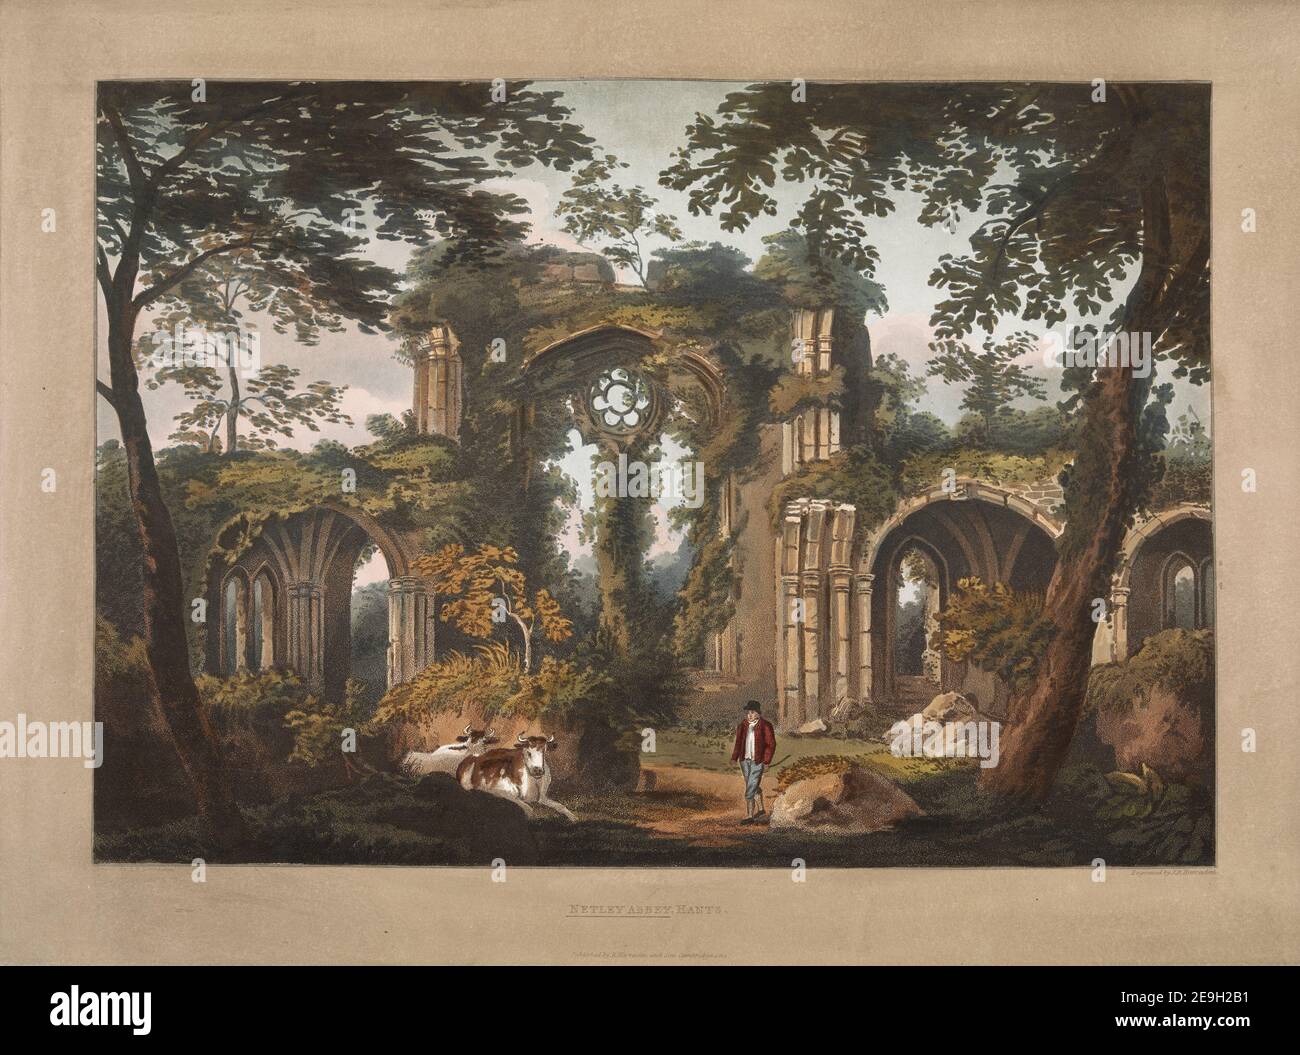 NETLEY ABBEY HANTS.  Author  Harraden, J. B. 14.83.i. Place of publication: [Cambridge] Publisher: Published R. Harraden and Son, Cambridge, Date of publication: 1814.  Item type: 1 print Medium: aquatint and etching with hand-colouring Dimensions: sheet 42.8 x 61.2 cm  Former owner: George III, King of Great Britain, 1738-1820 Stock Photo